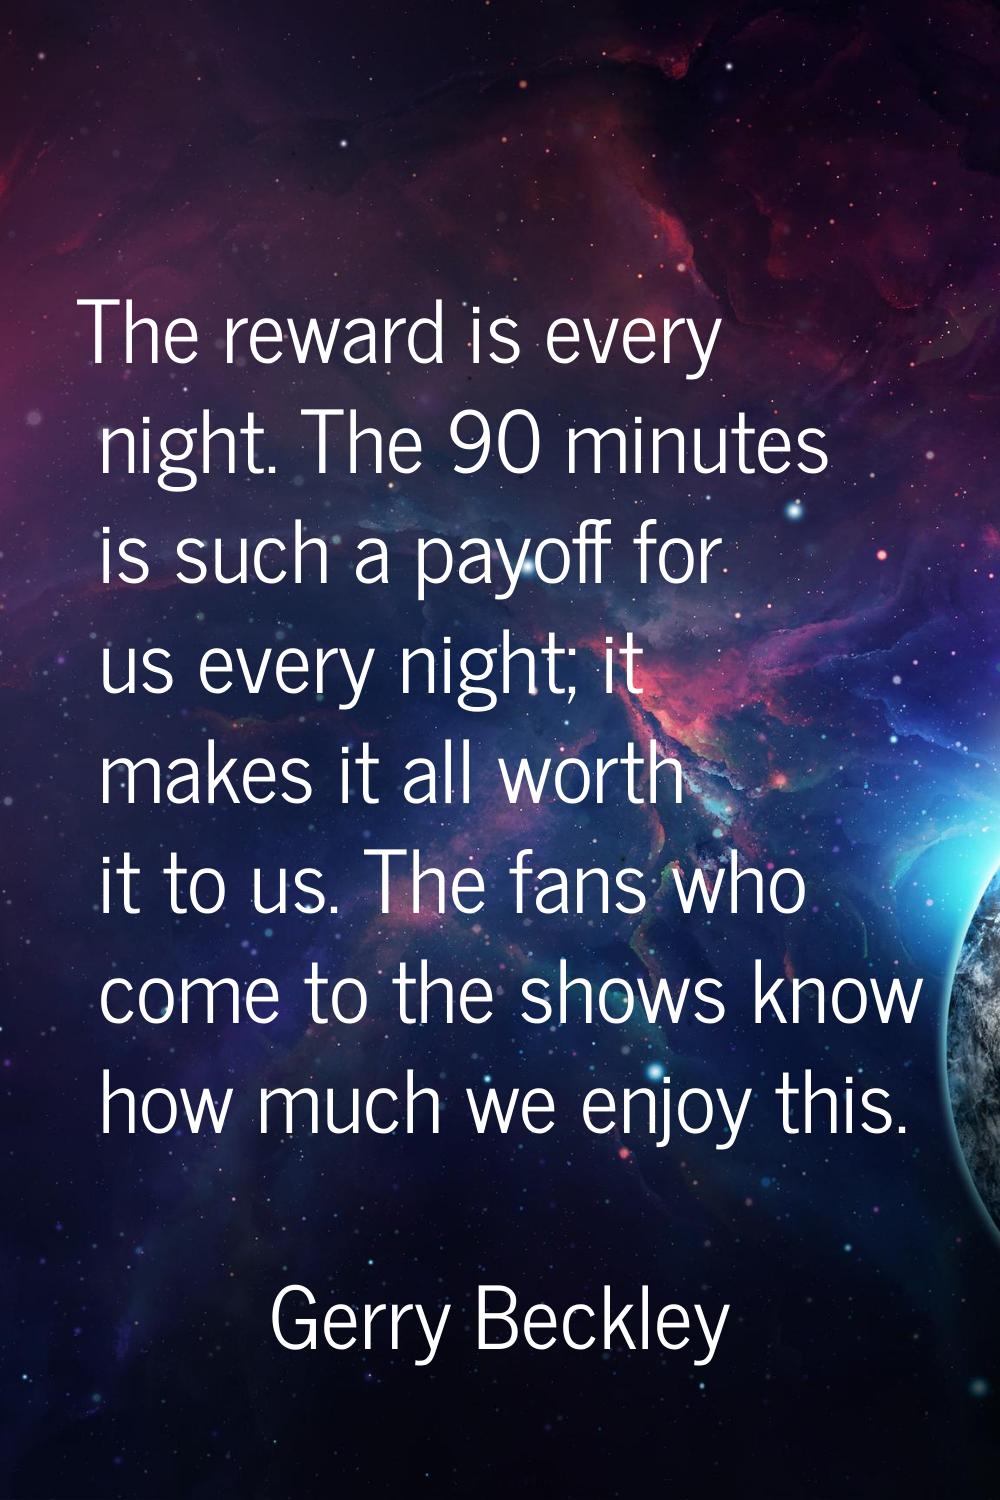 The reward is every night. The 90 minutes is such a payoff for us every night; it makes it all wort